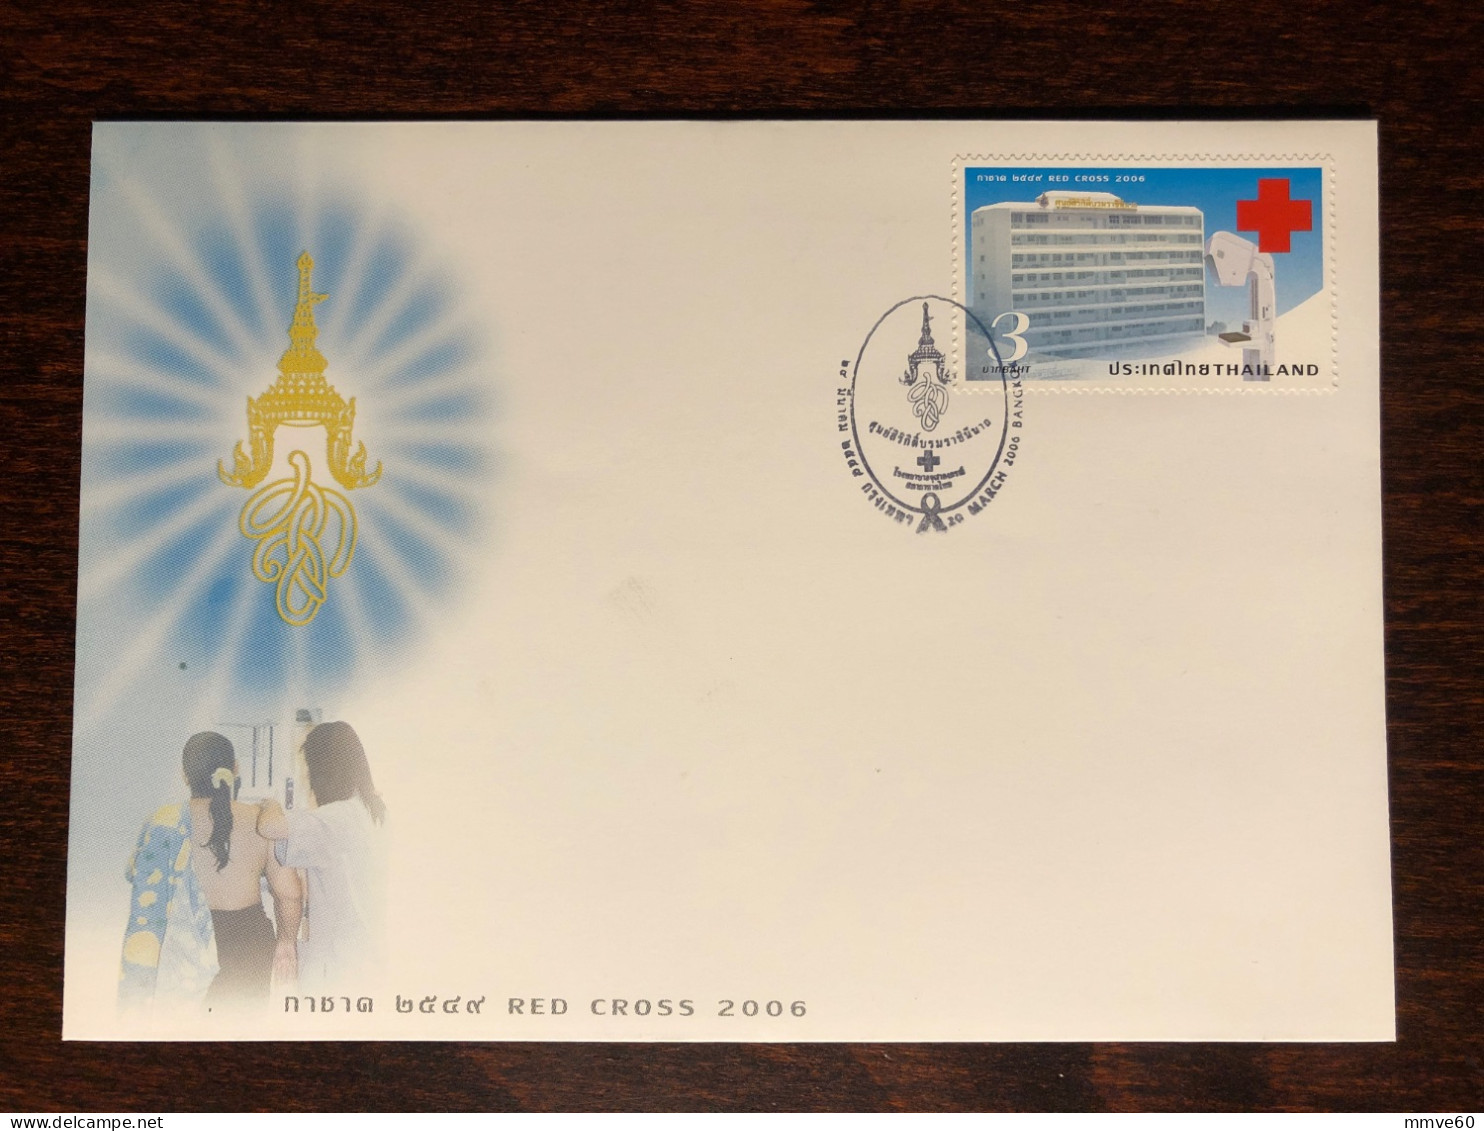 THAILAND FDC COVER 2006 YEAR BREAST CANCER RED CROSS HEALTH MEDICINE STAMPS - Tailandia